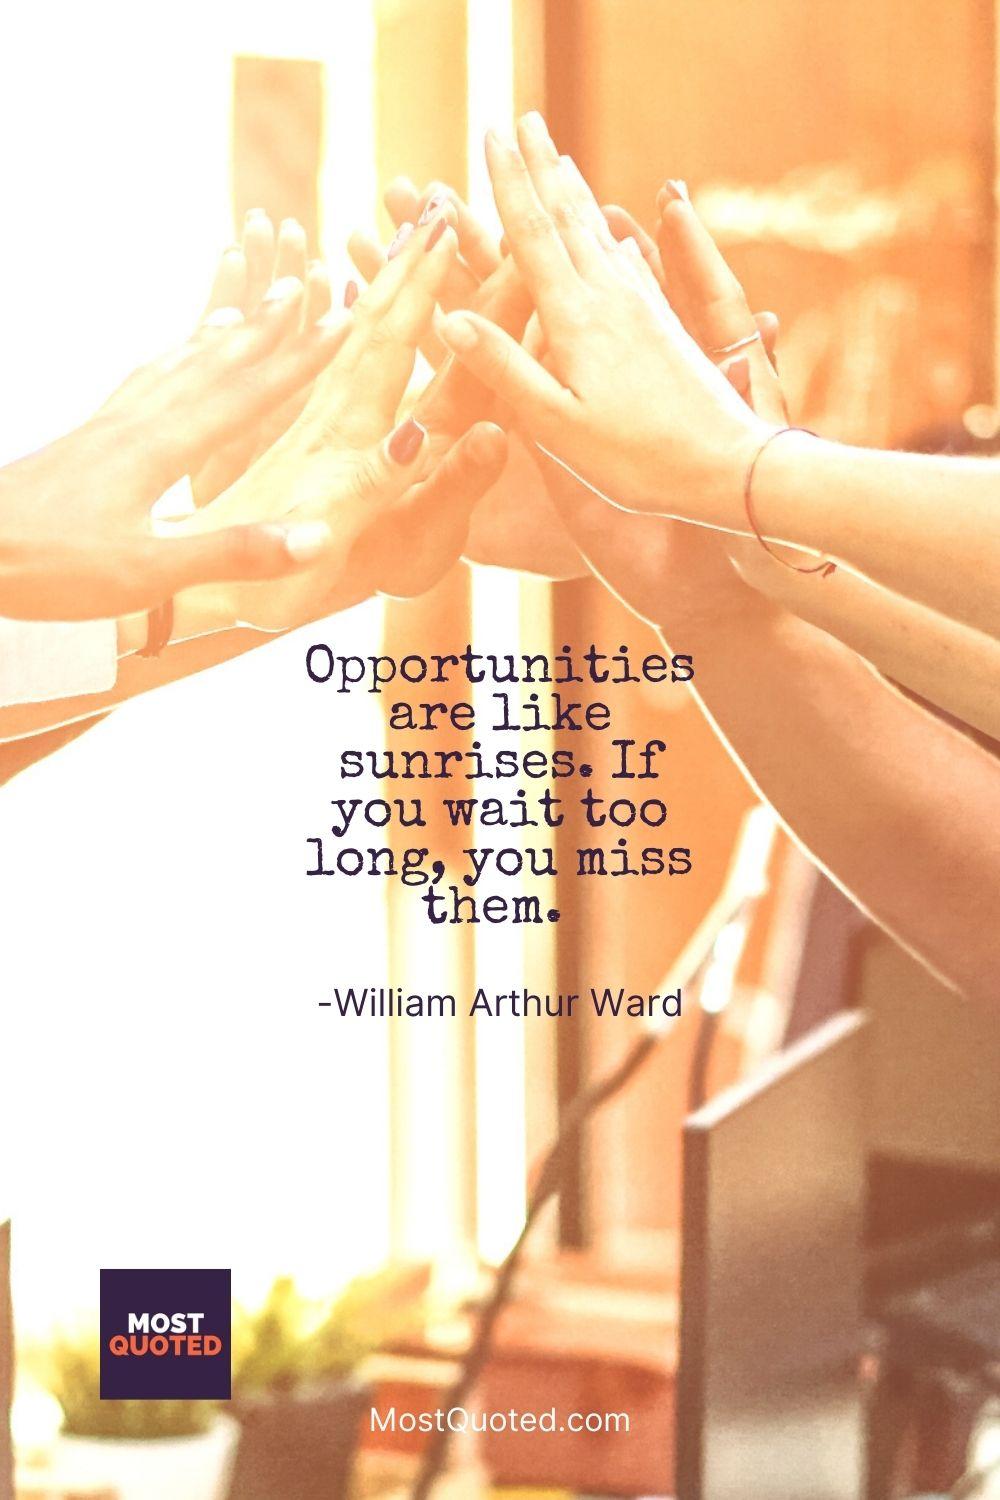 Opportunities are like sunrises. If you wait too long, you miss them.  - William Arthur Ward